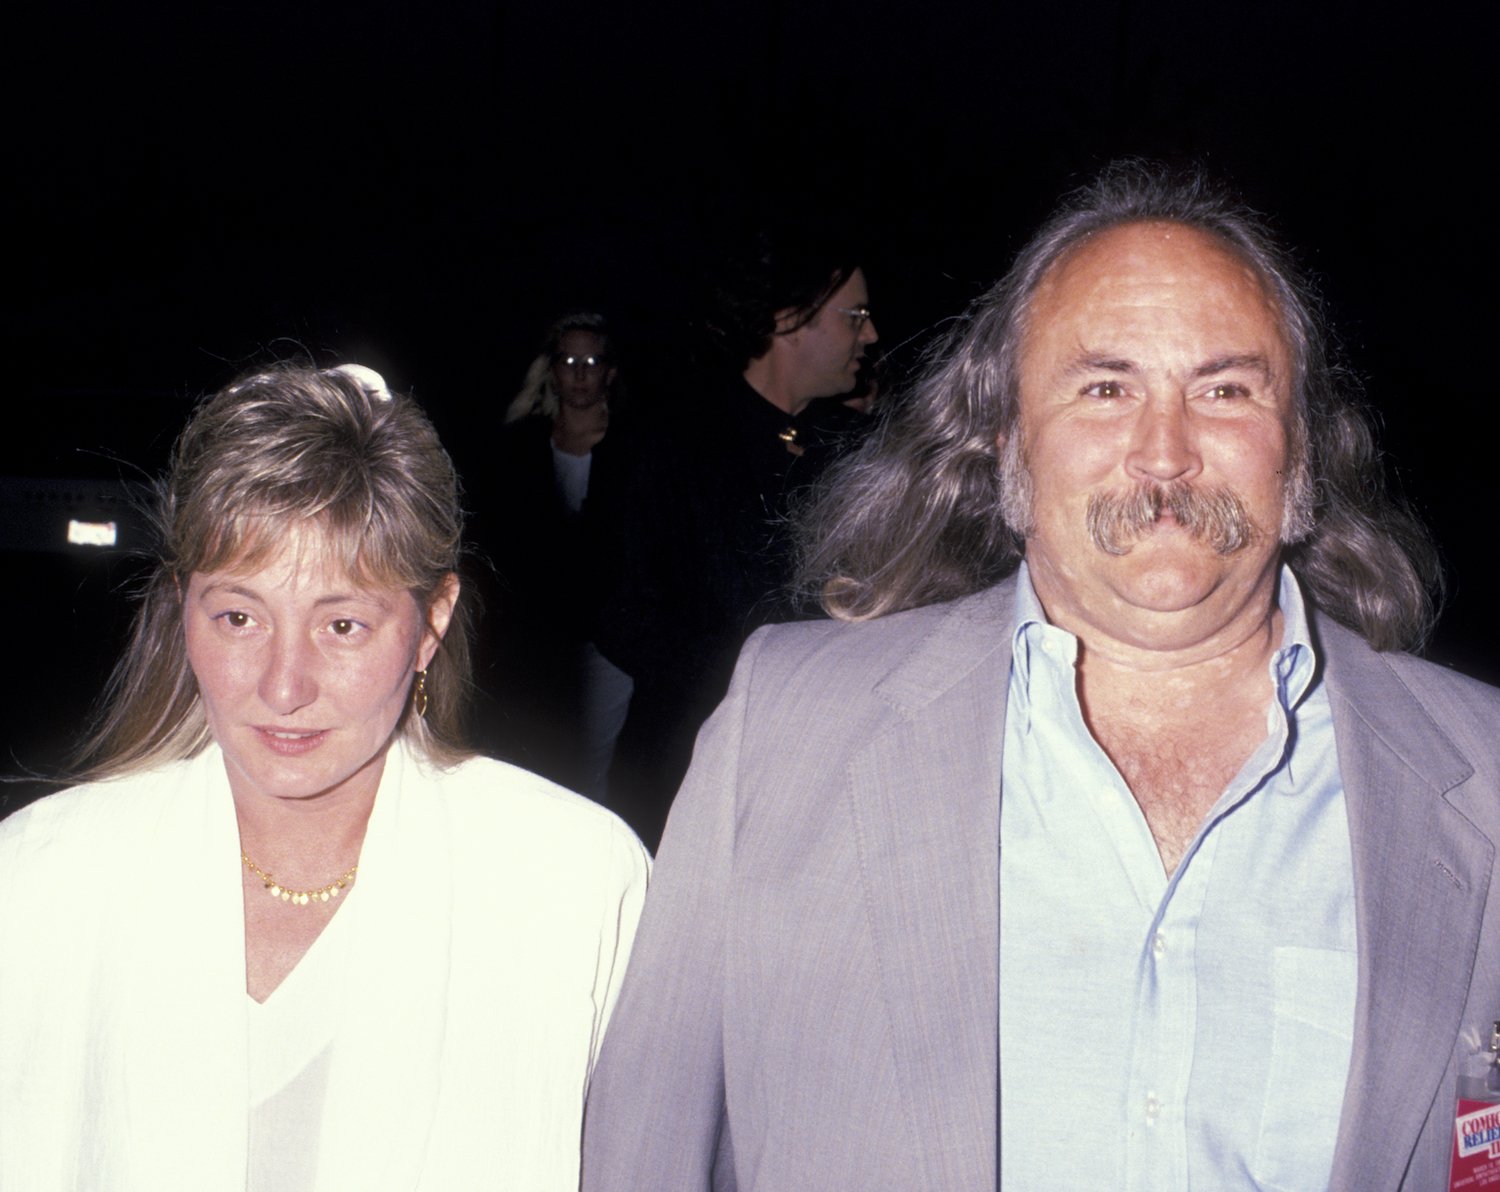 David Crosby and wife Jan Dance walking together against a black background